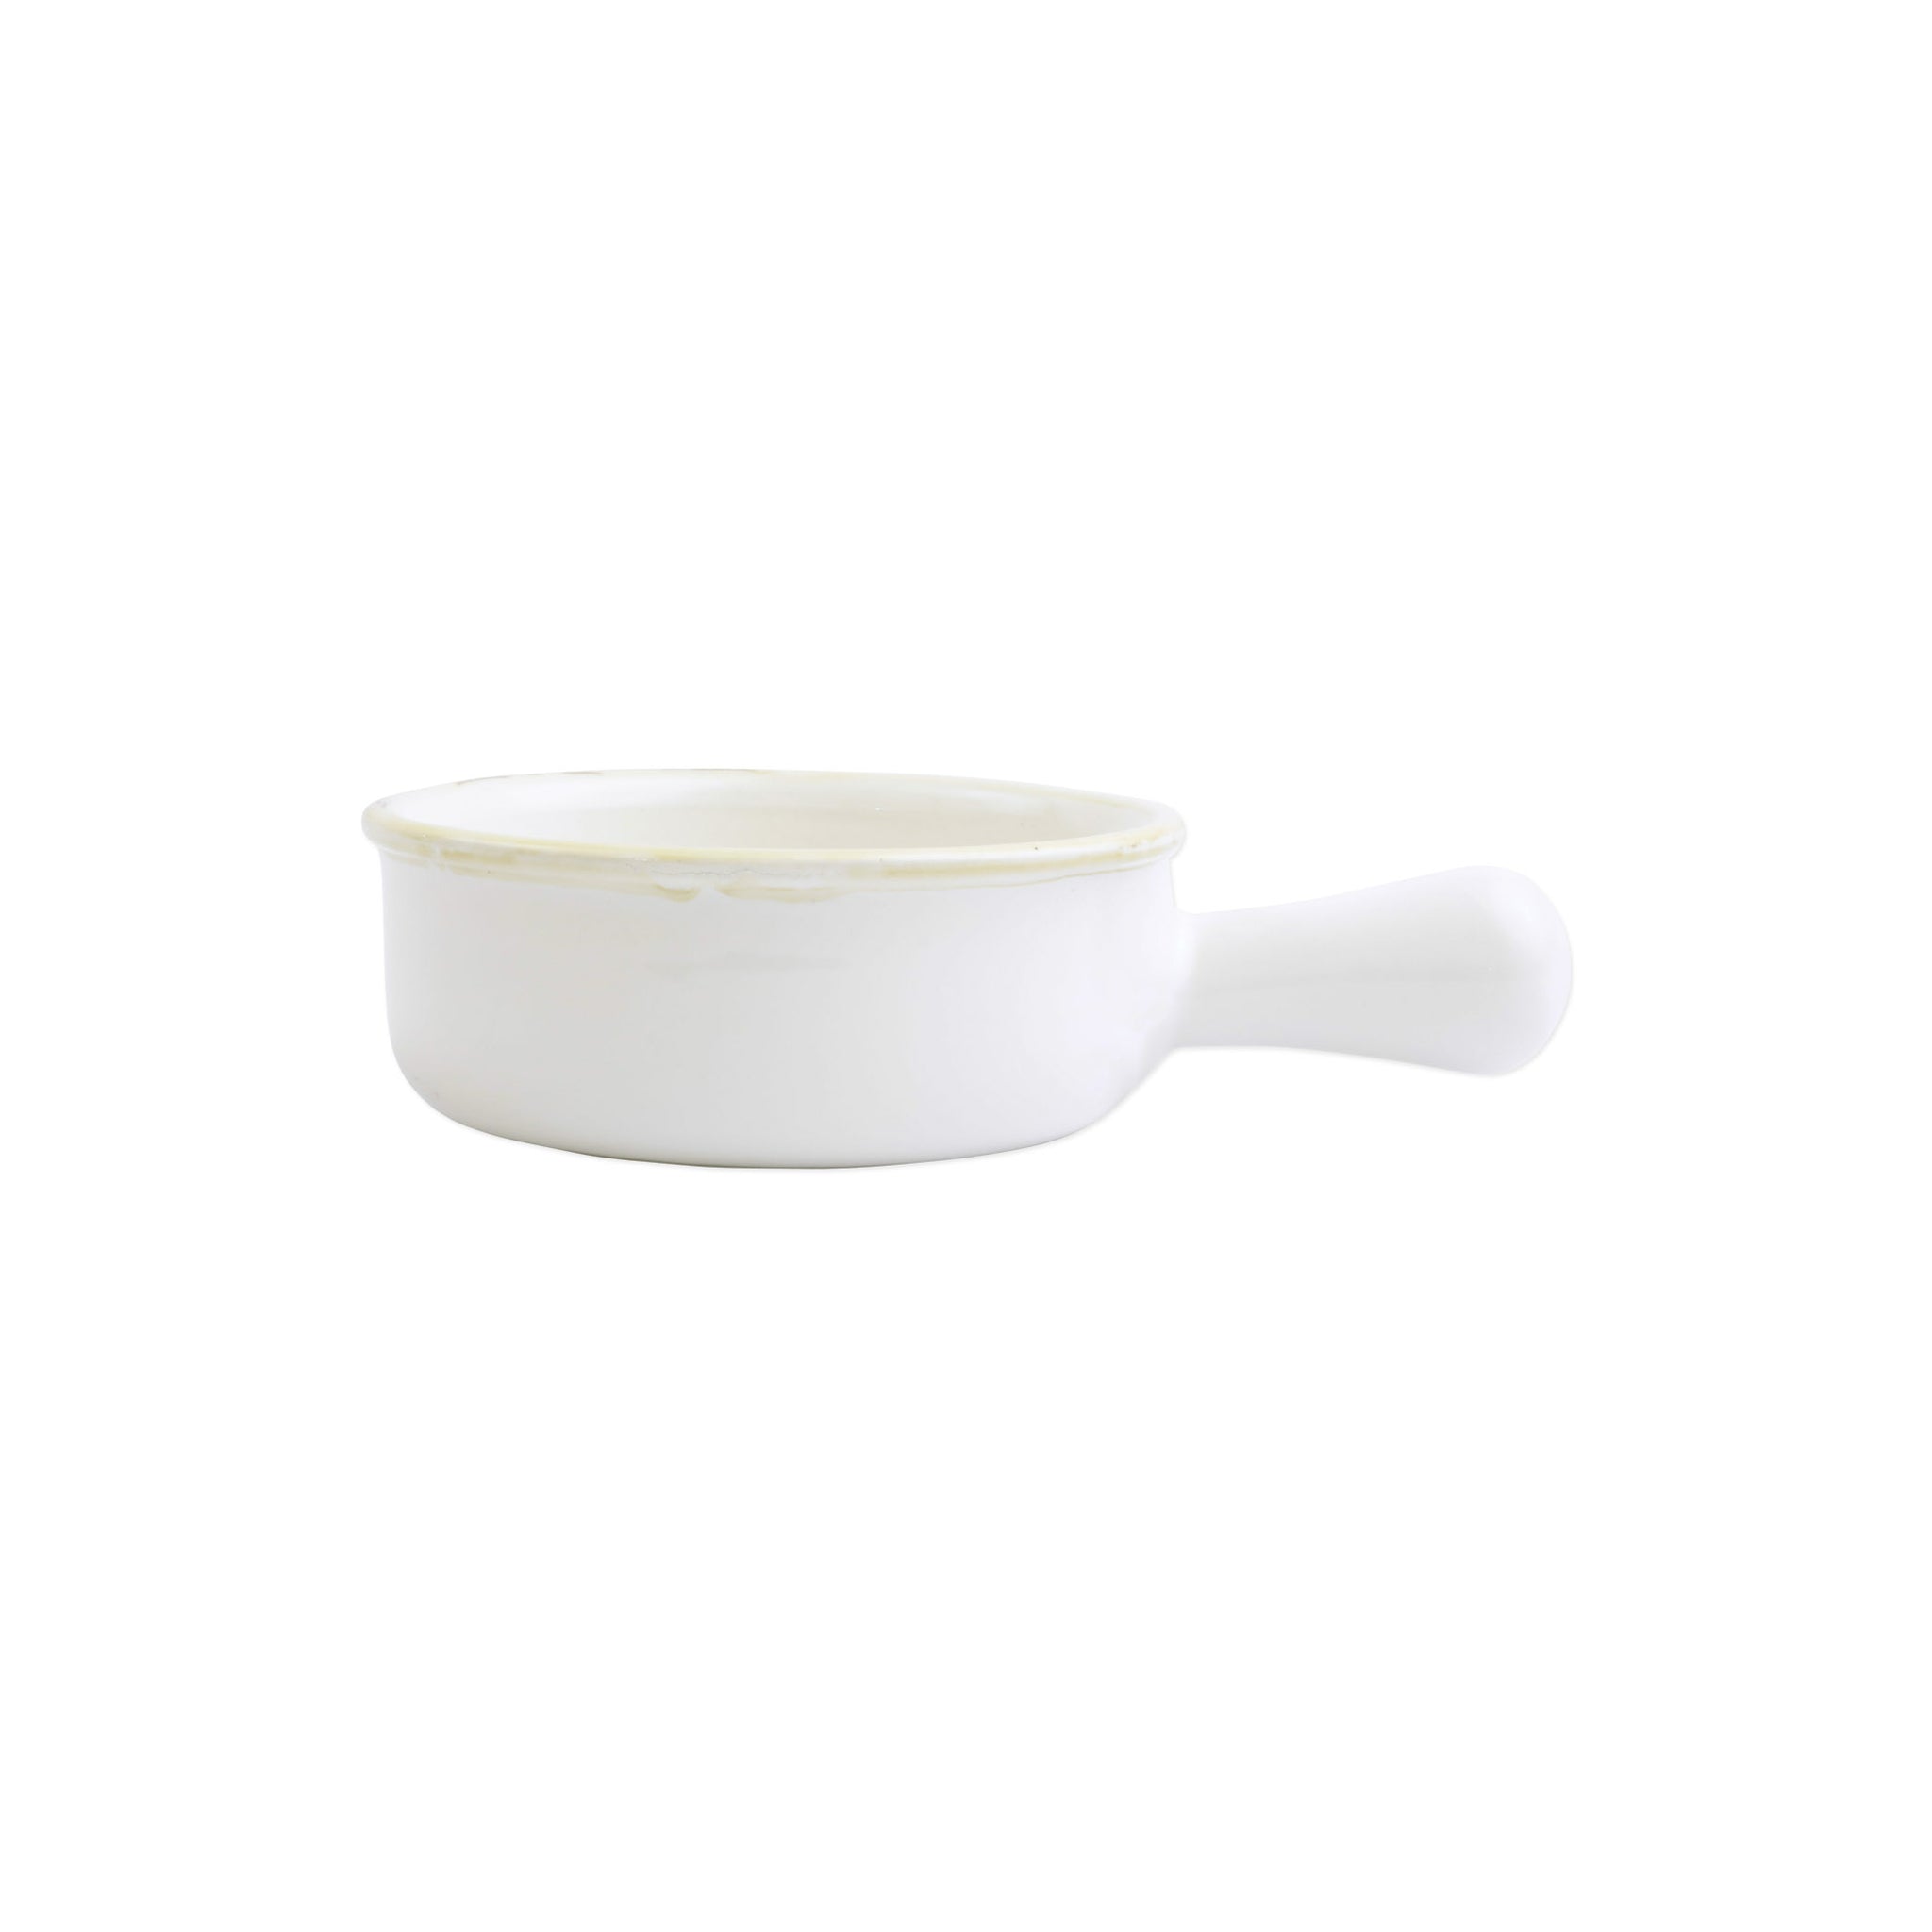 Italian Bakers Small Round Baker with Large Handle - White